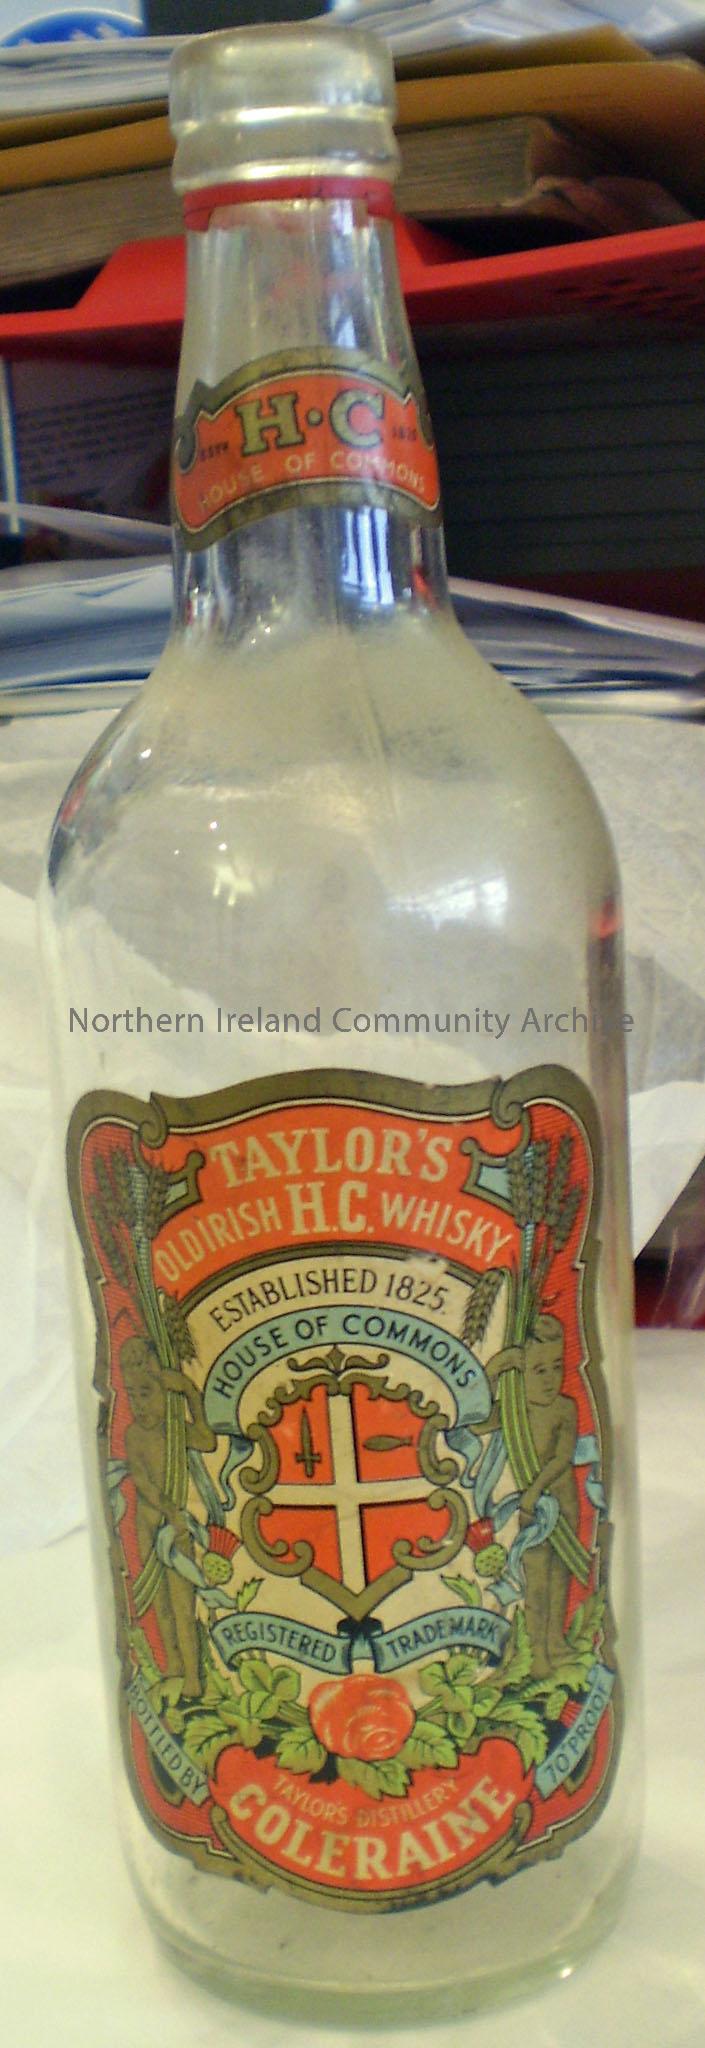 Large, curved, glass Taylor’s Coleraine whisky bottle with decorative label. Label reads ‘Taylor’s Old Irish H.C Whisky, Established 1825, House of Co…